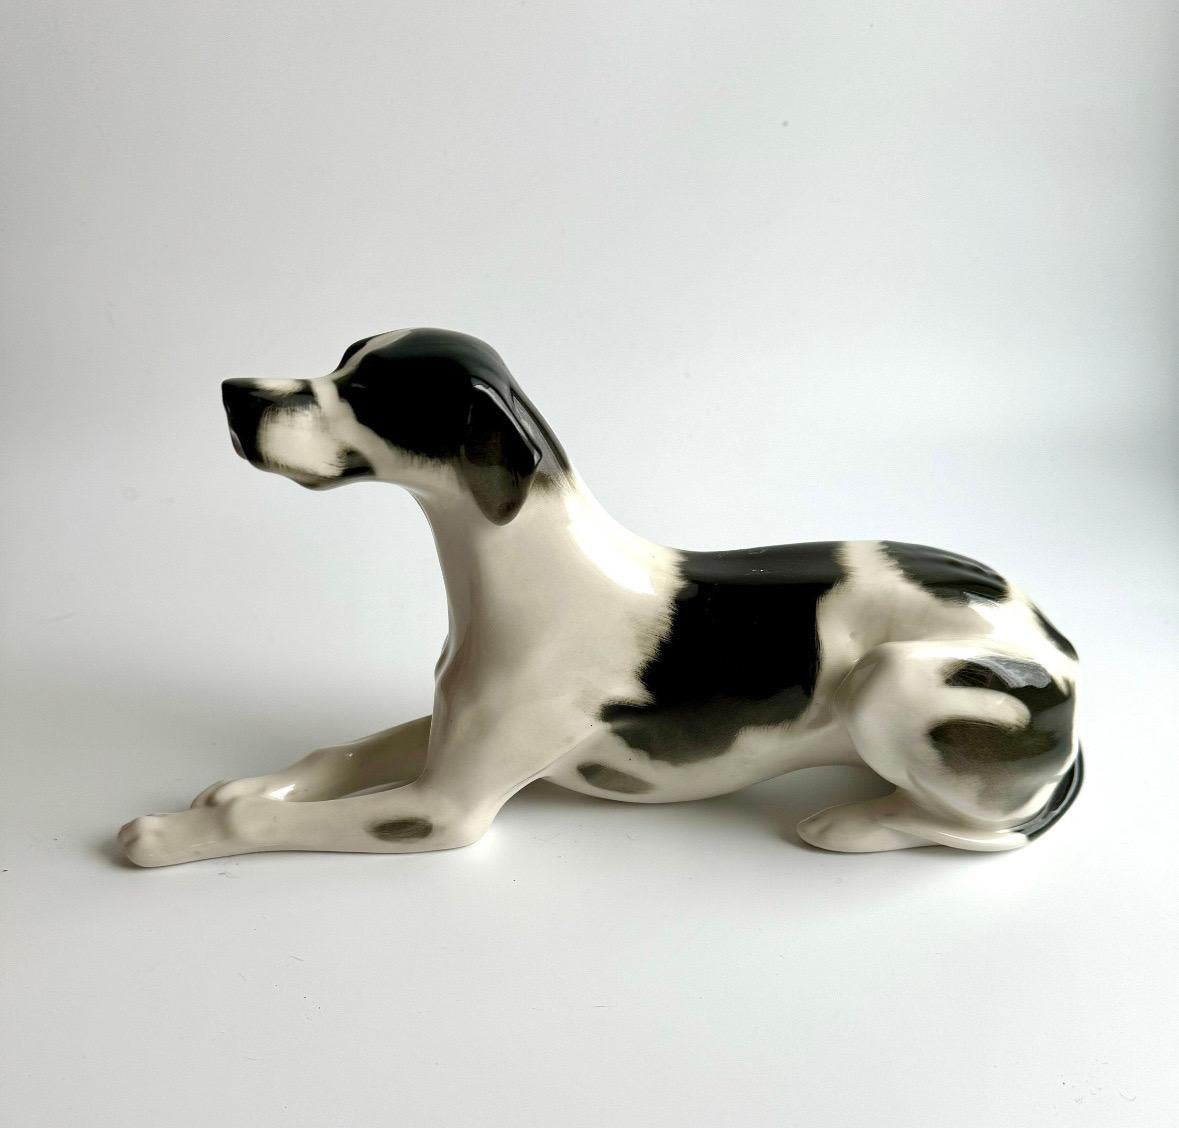 Evoke the timeless grace of classic English charm with this exquisite porcelain English Pointer dog figurine. Perfectly captured in a serene resting pose, this large statuette showcases the elegant lines and dignified expression characteristic of